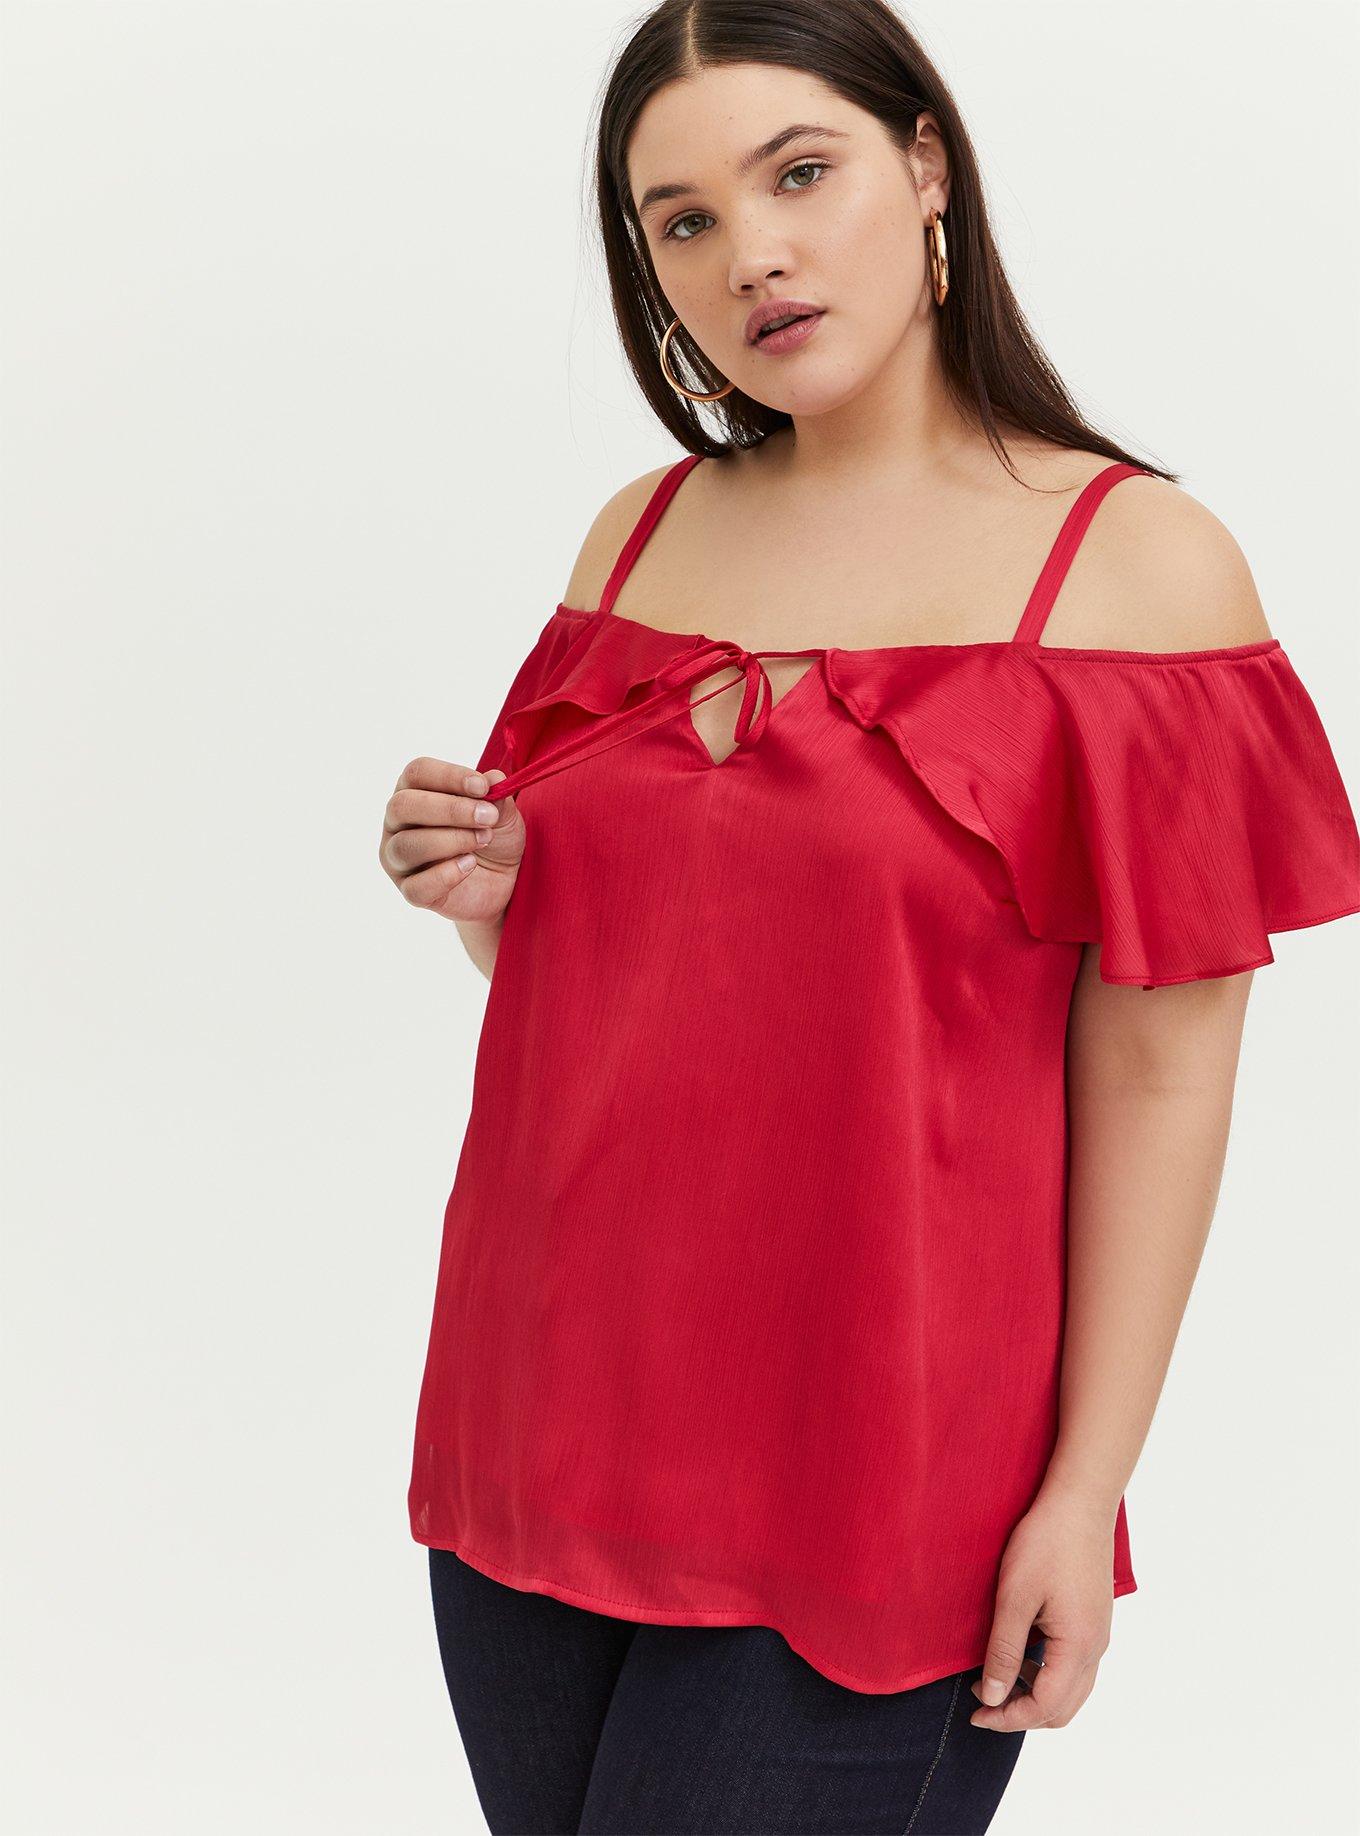 Plus Size - Fit And Flare Textured Chiffon Top - Torrid